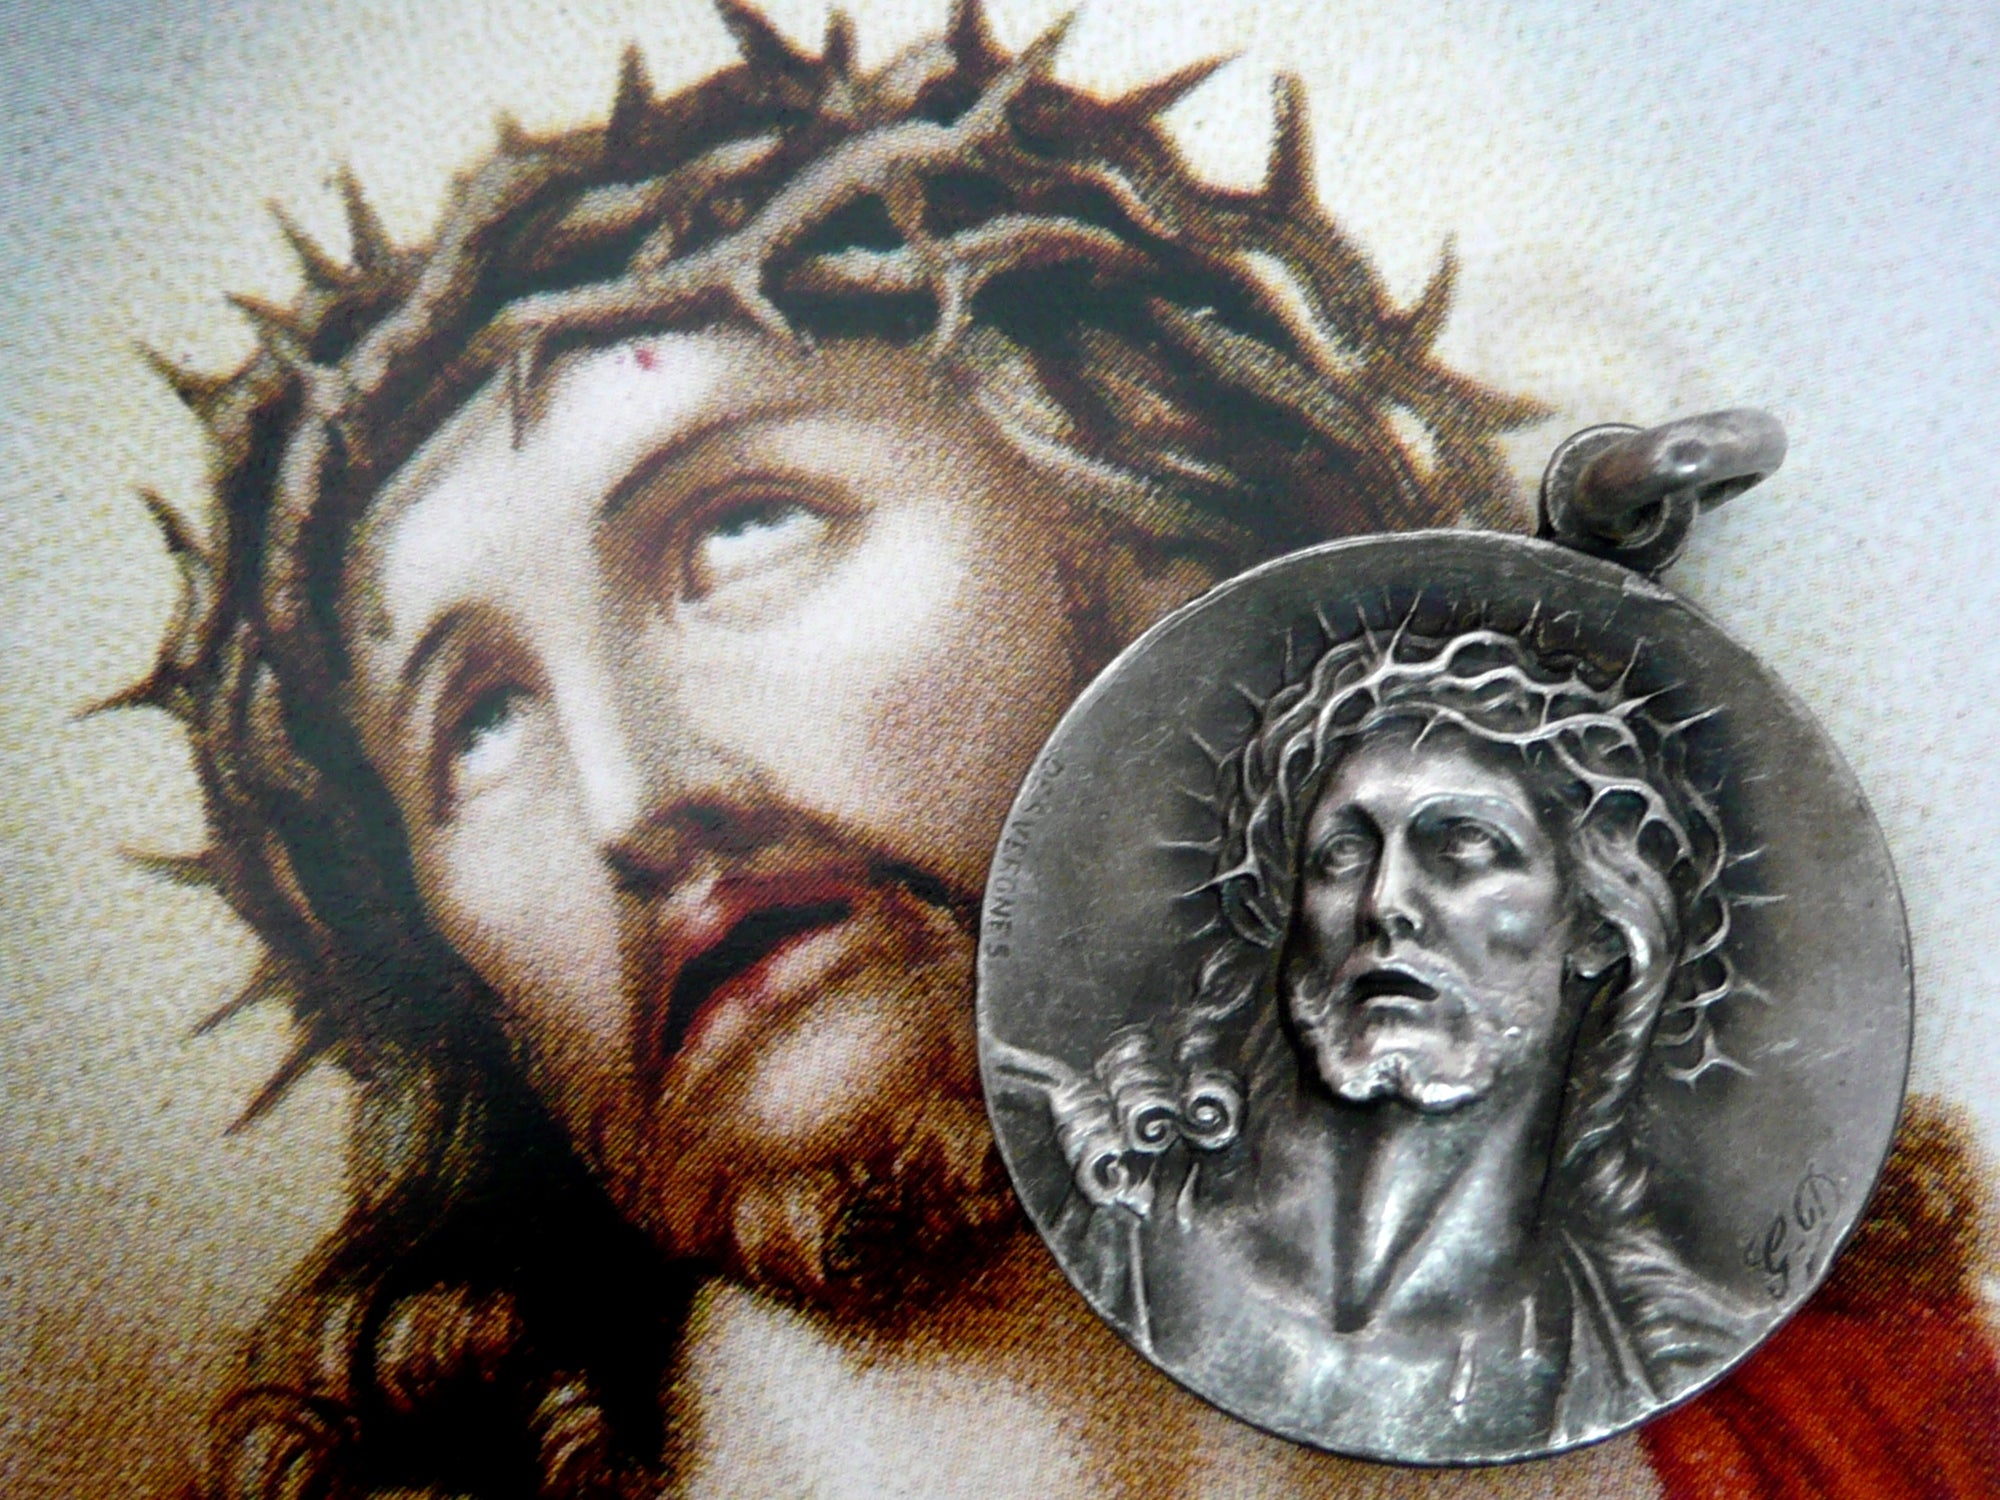 Vintage French 1933 Holy Year Medal of Jesus Crowned with Thorns, Face of Jesus Medal